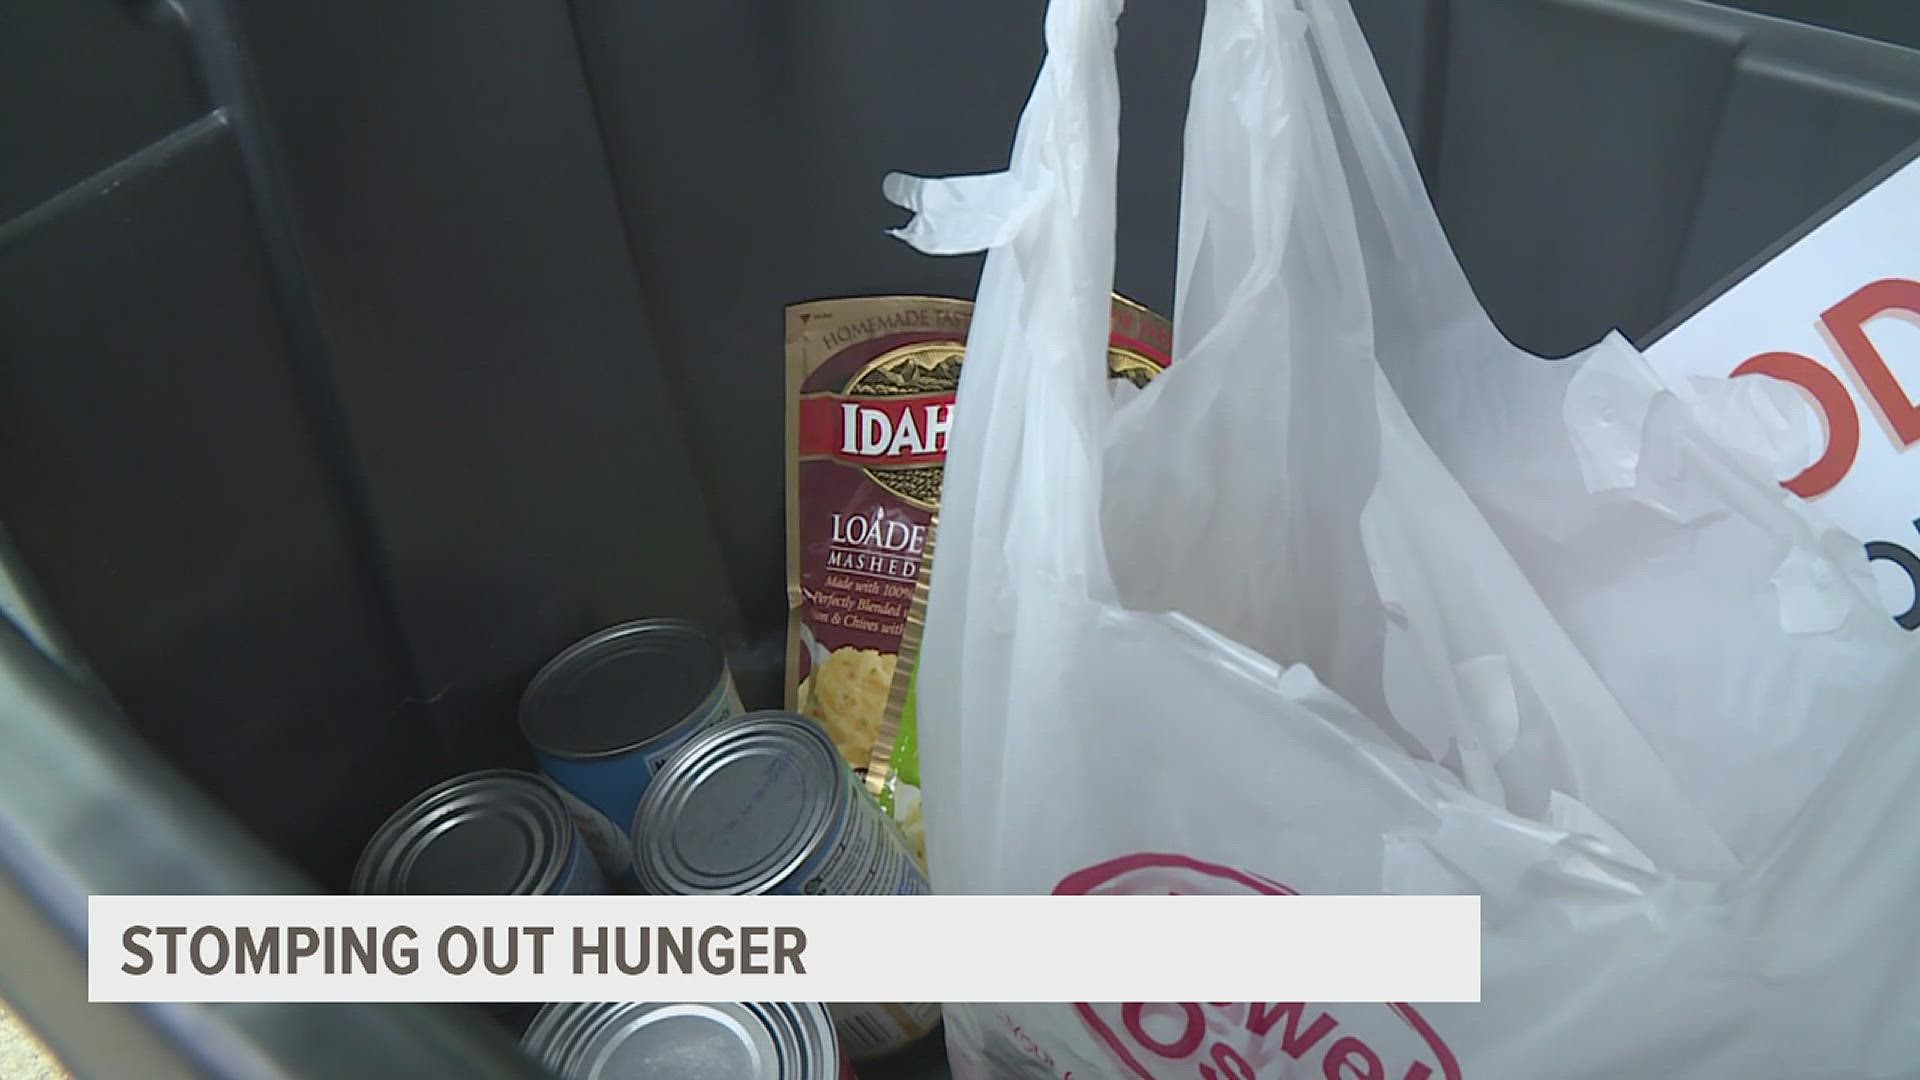 The group is collecting donations throughout the week for the ten percent of people facing food security in Rock Island County.